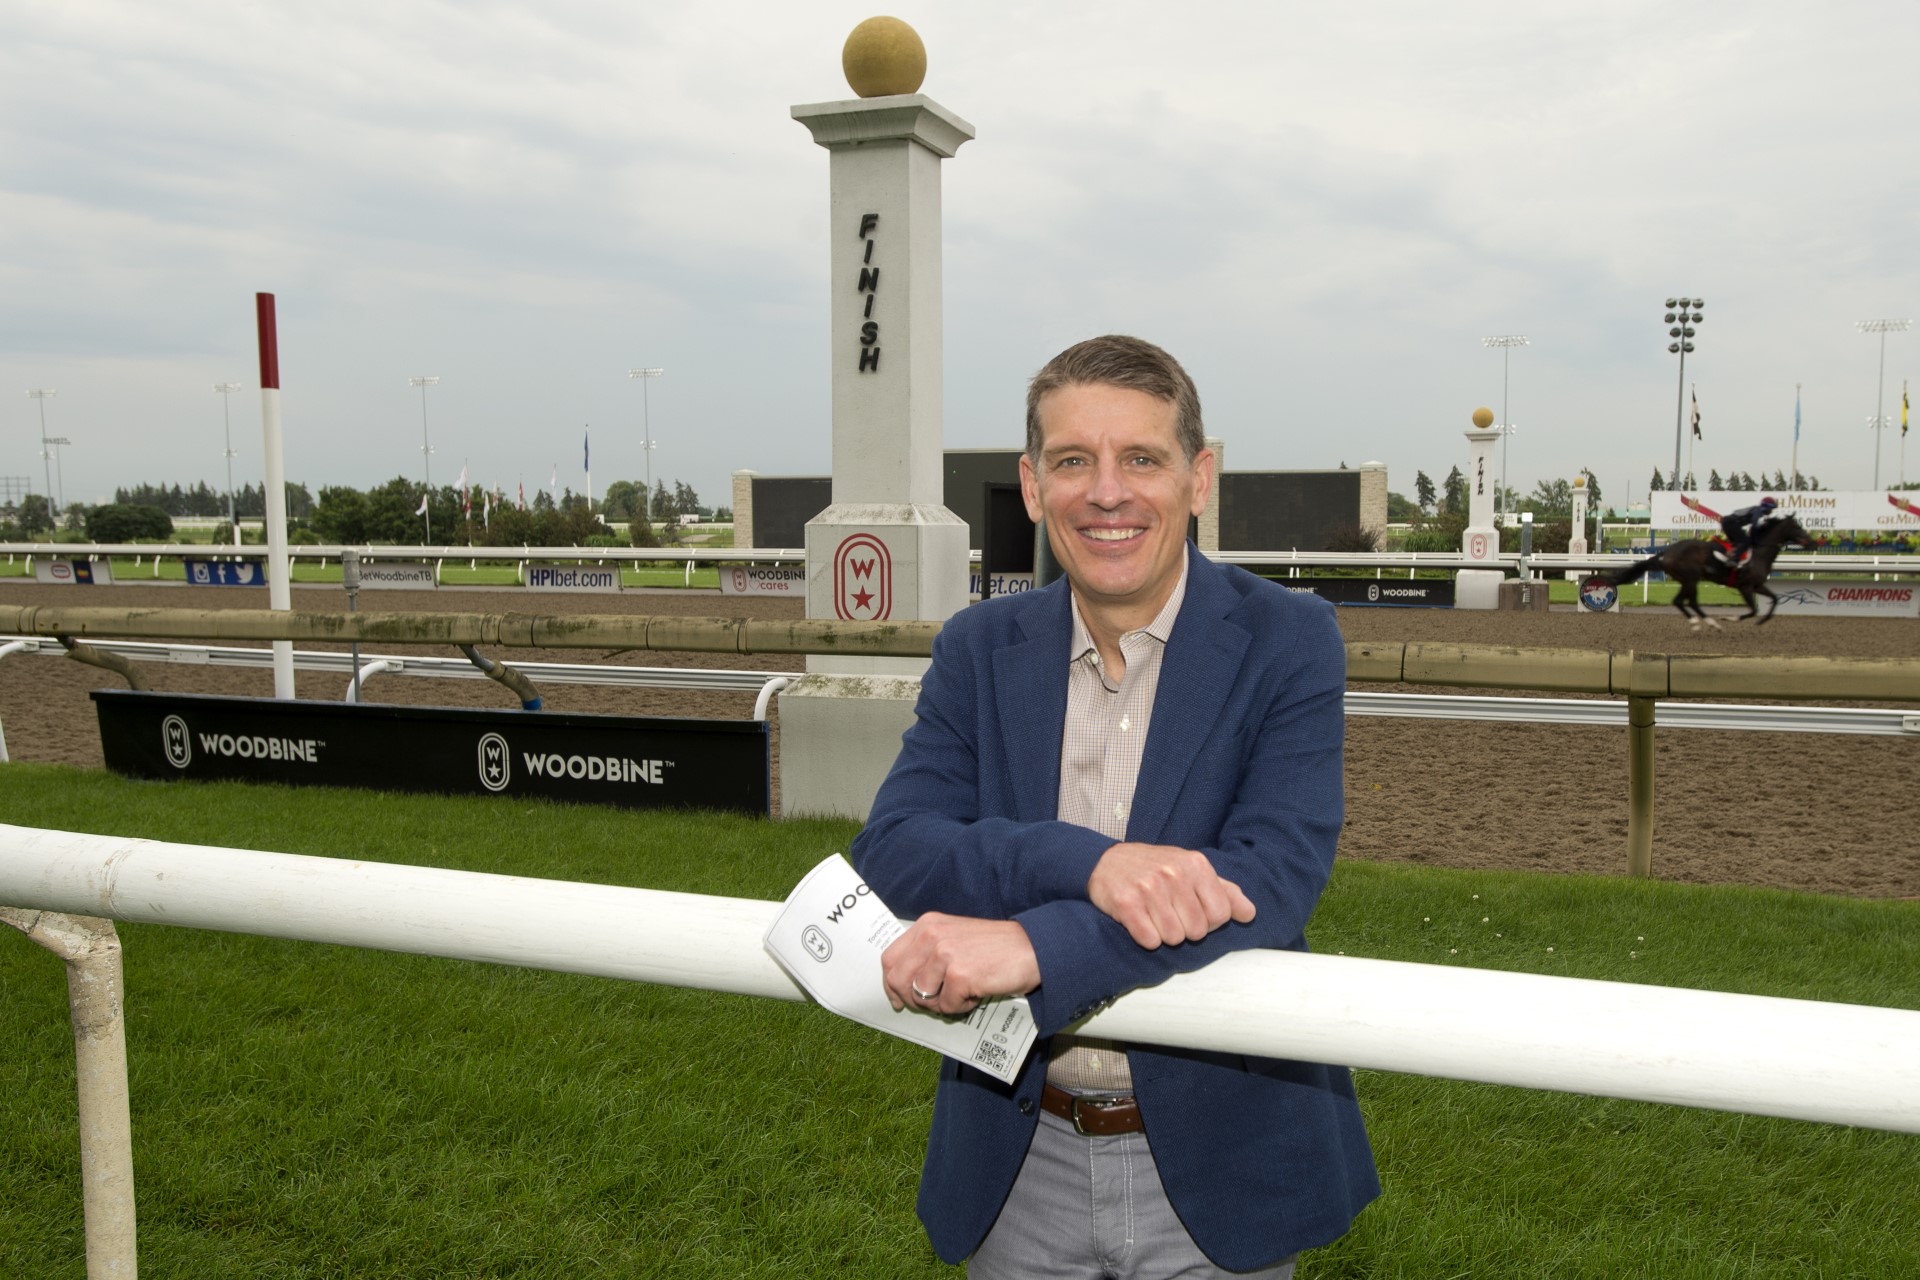 Copeland to Lead Woodbine as Next CEO